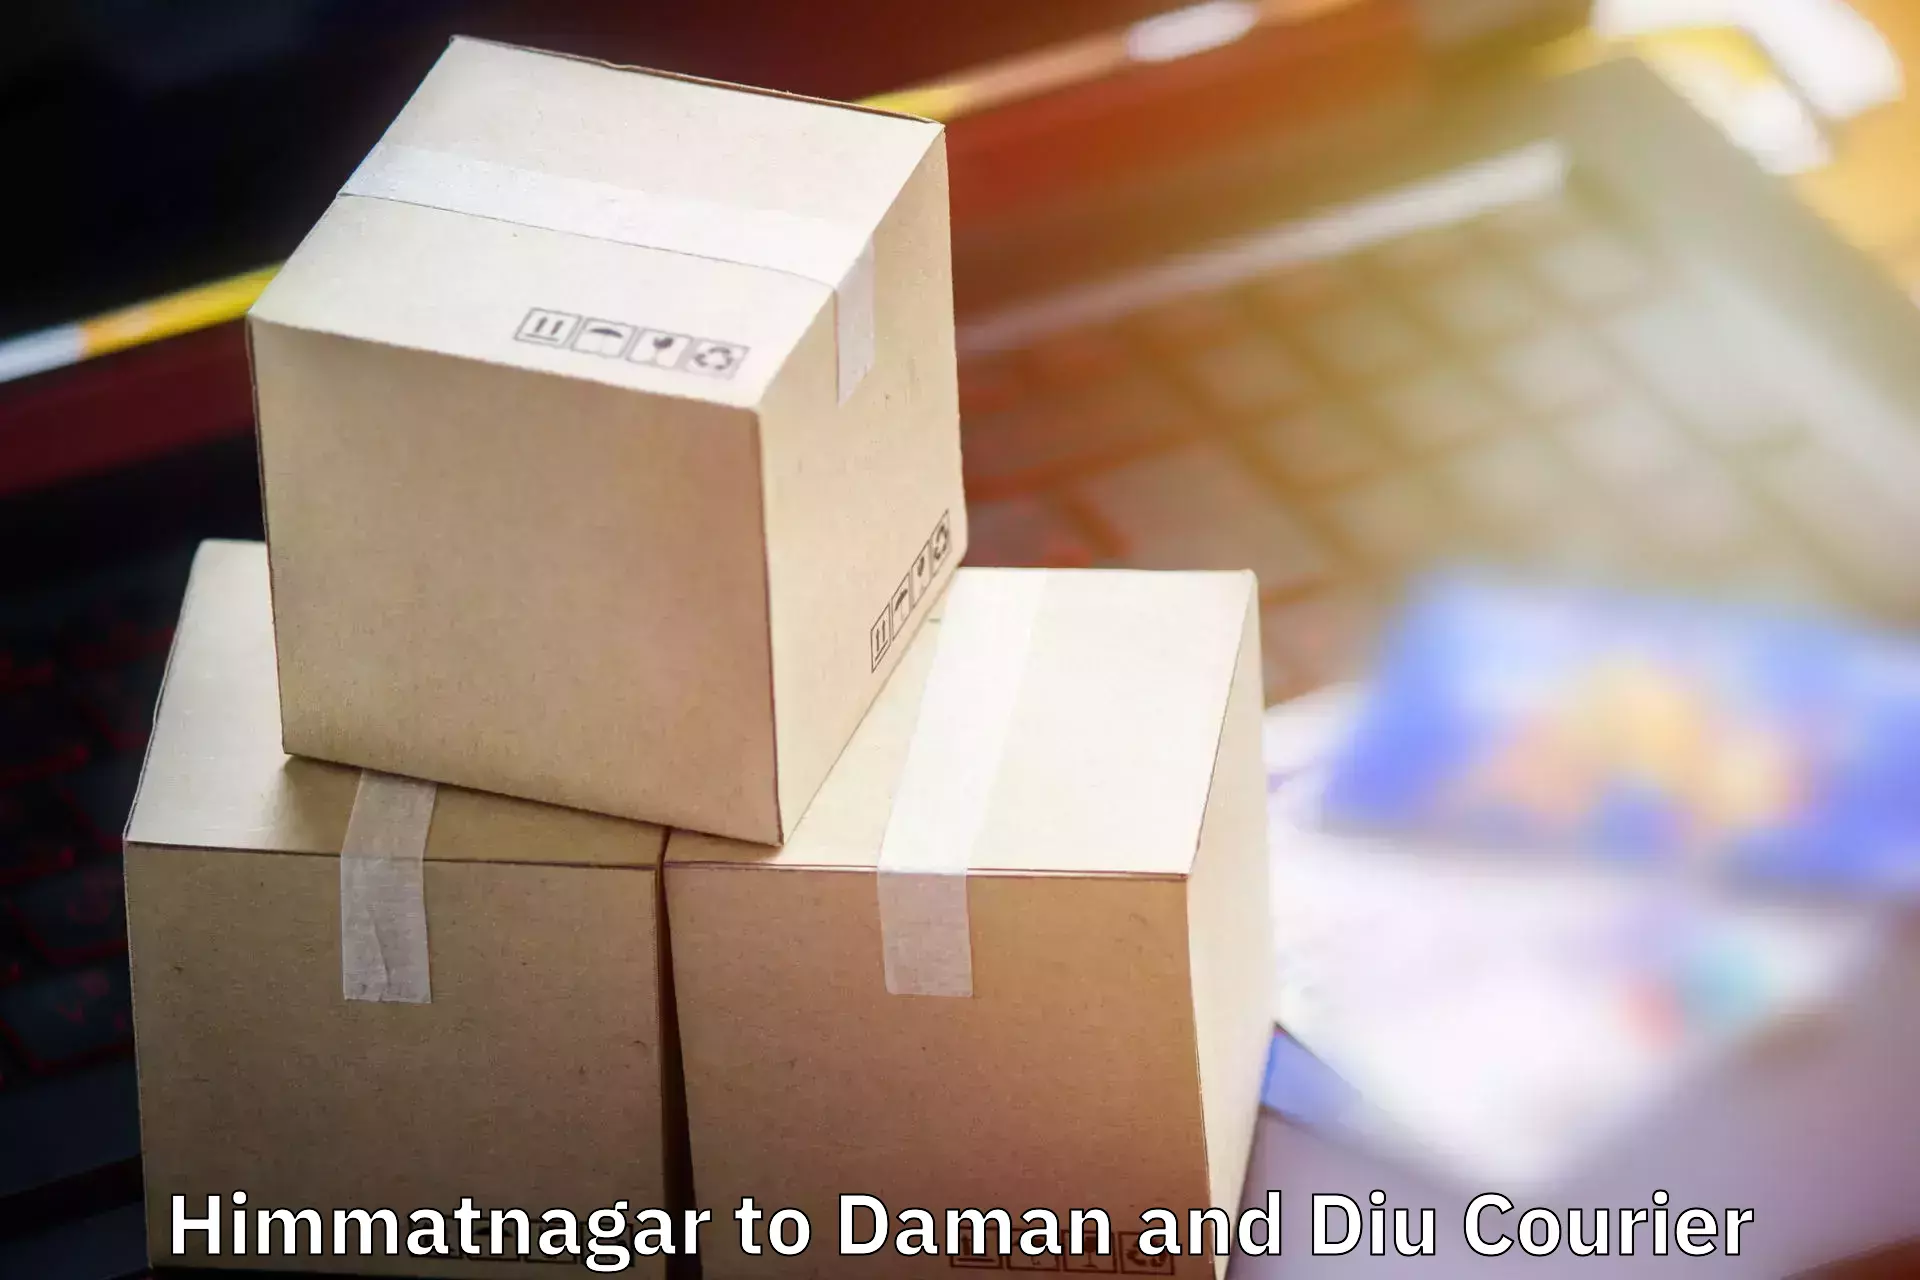 Luggage delivery system Himmatnagar to Daman and Diu